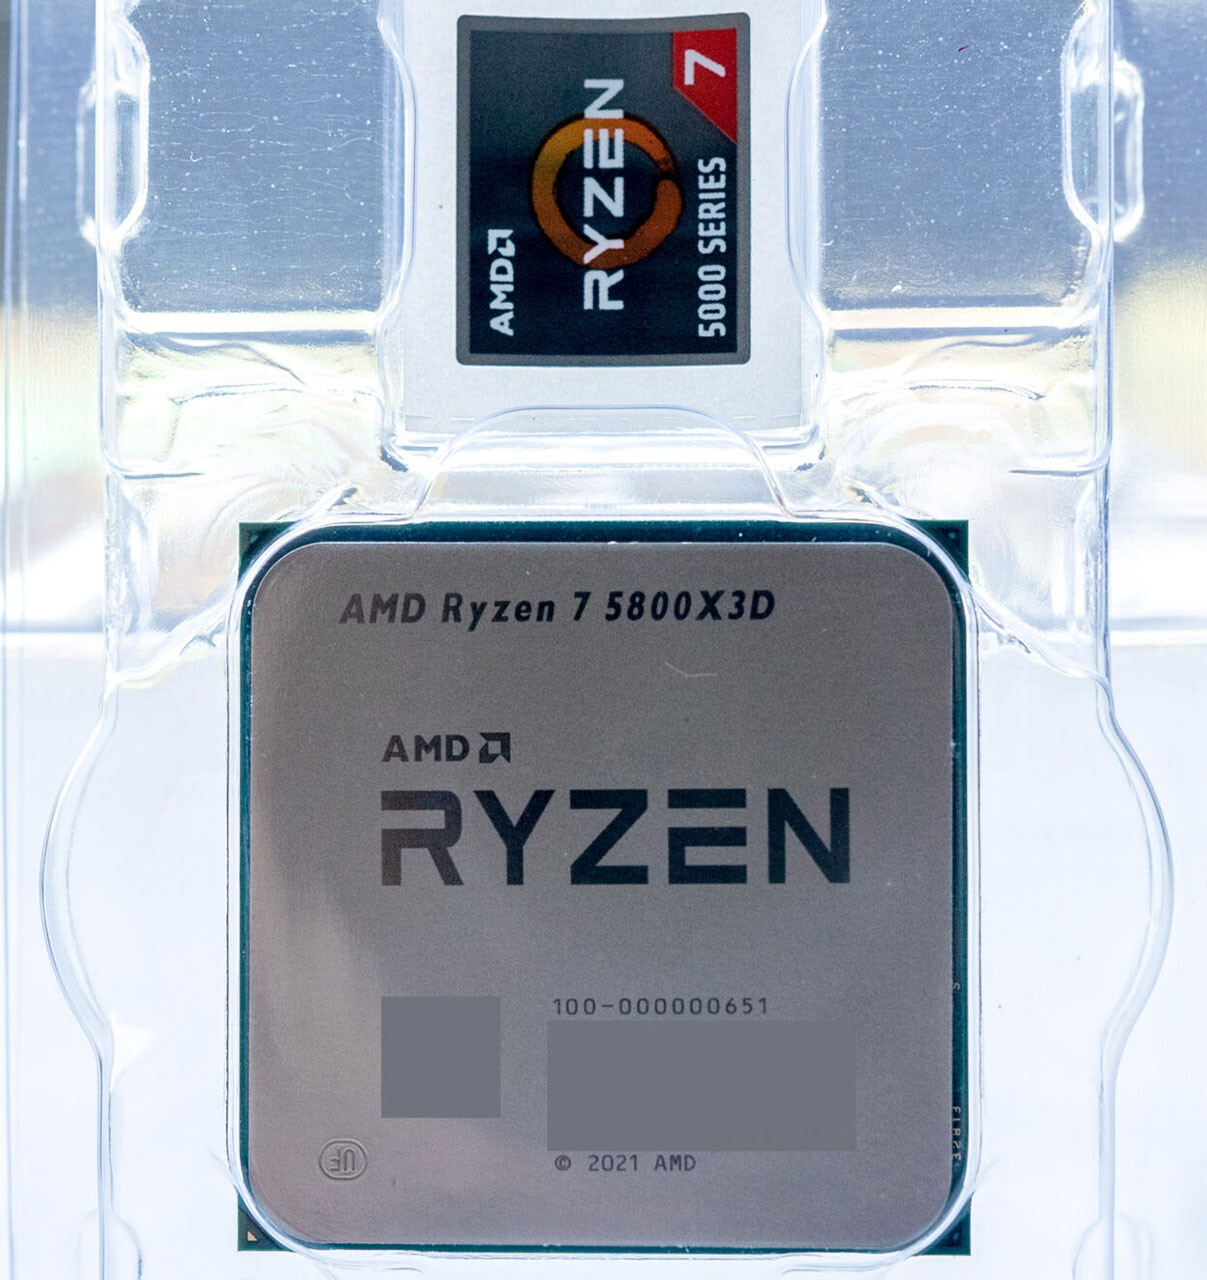 AMD Ryzen 7 5800X3D - The Gaming King of AM4